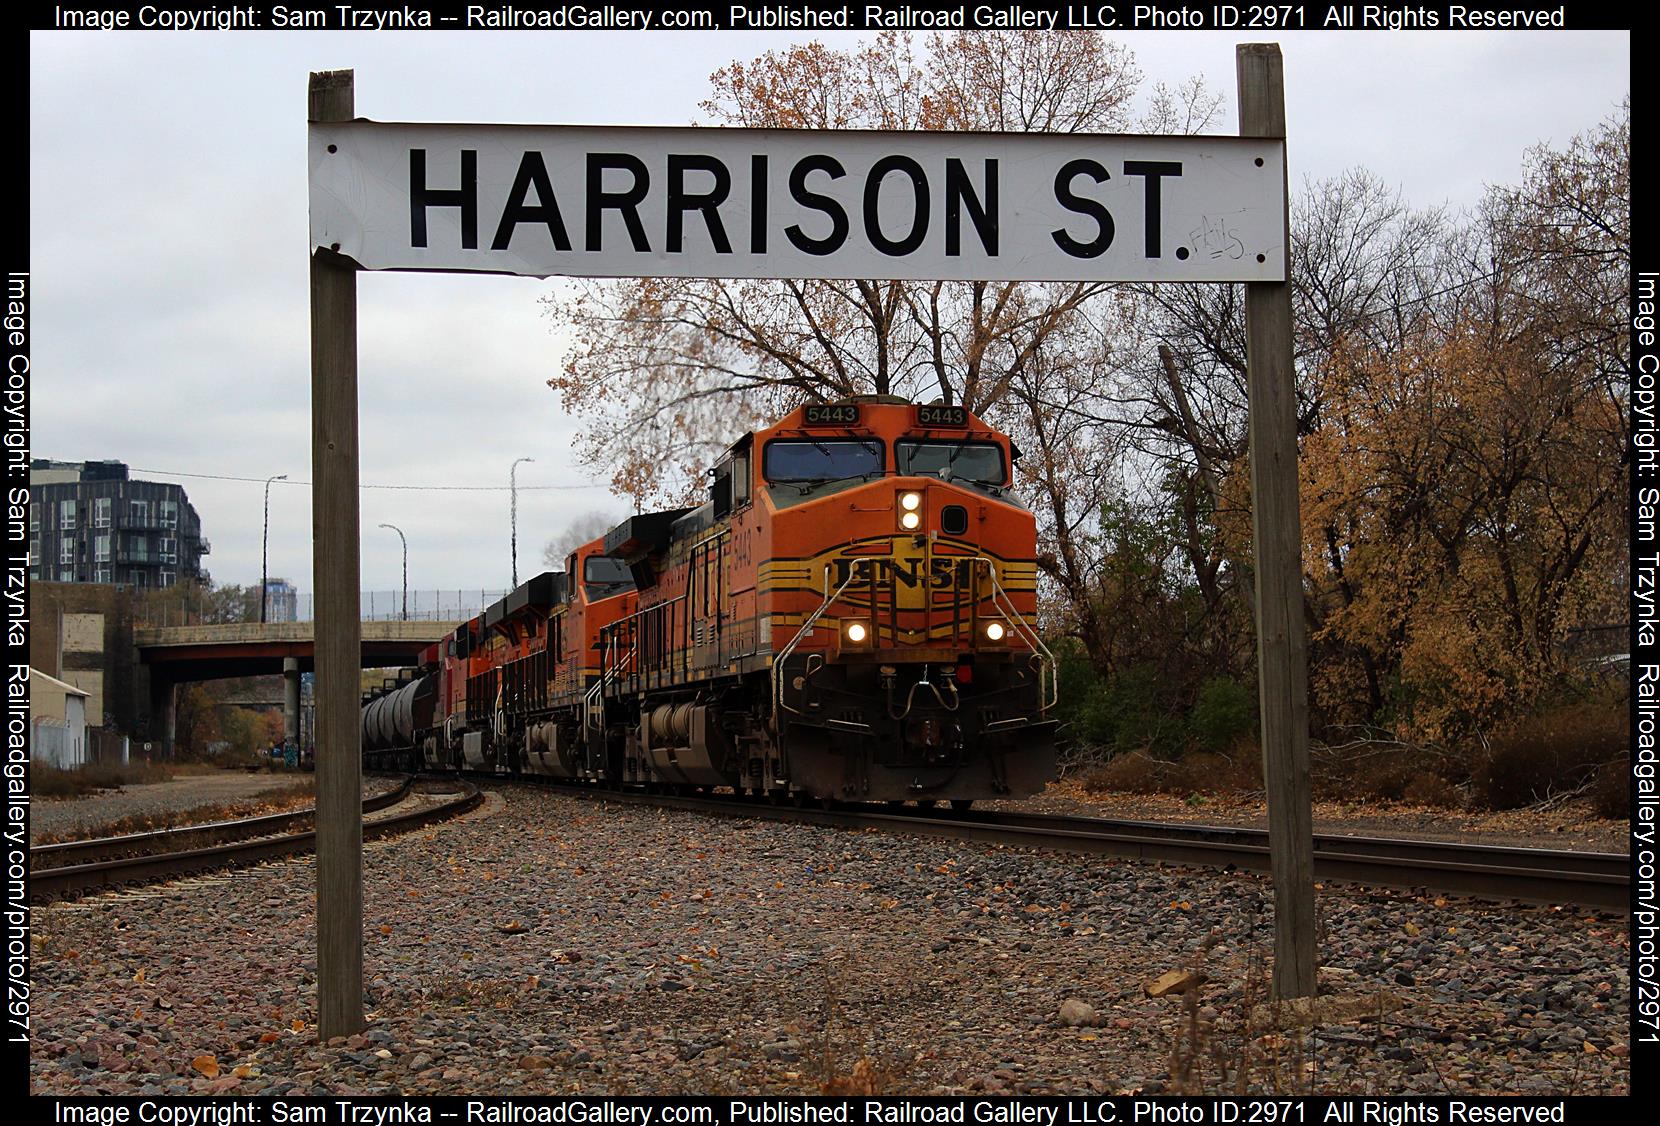 BNSF 5443 is a class GE C44-9W (Dash 9-44CW) and  is pictured in Minneapolis, Minnesota, USA.  This was taken along the BNSF Wayzata Subdivision on the BNSF Railway. Photo Copyright: Sam Trzynka uploaded to Railroad Gallery on 01/16/2024. This photograph of BNSF 5443 was taken on Friday, November 10, 2023. All Rights Reserved. 